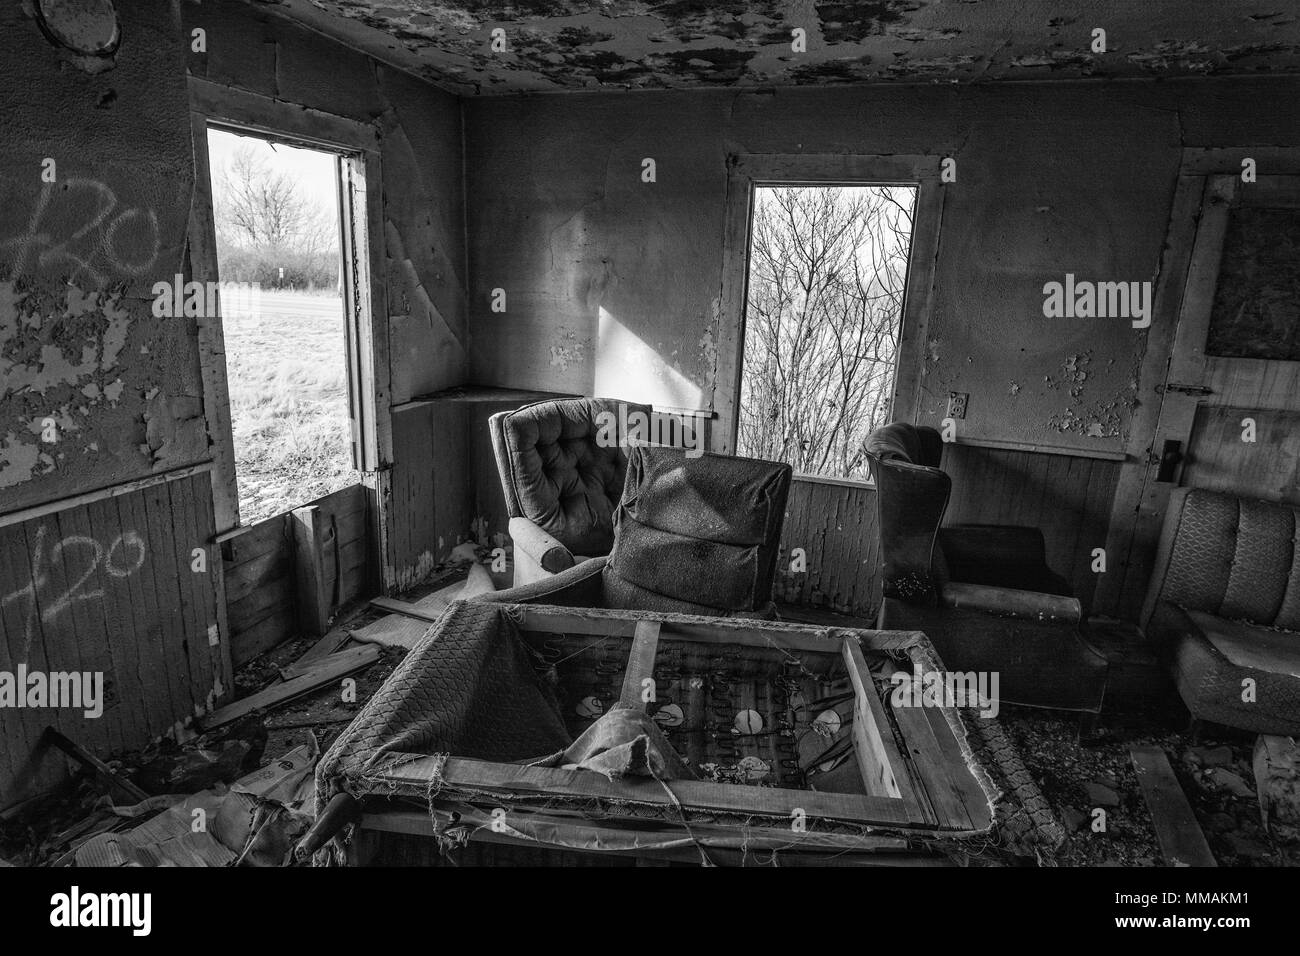 The inside of an abandoned house. This house has been abandoned for years and is showing the signs of vandalism and deterioration. Stock Photo